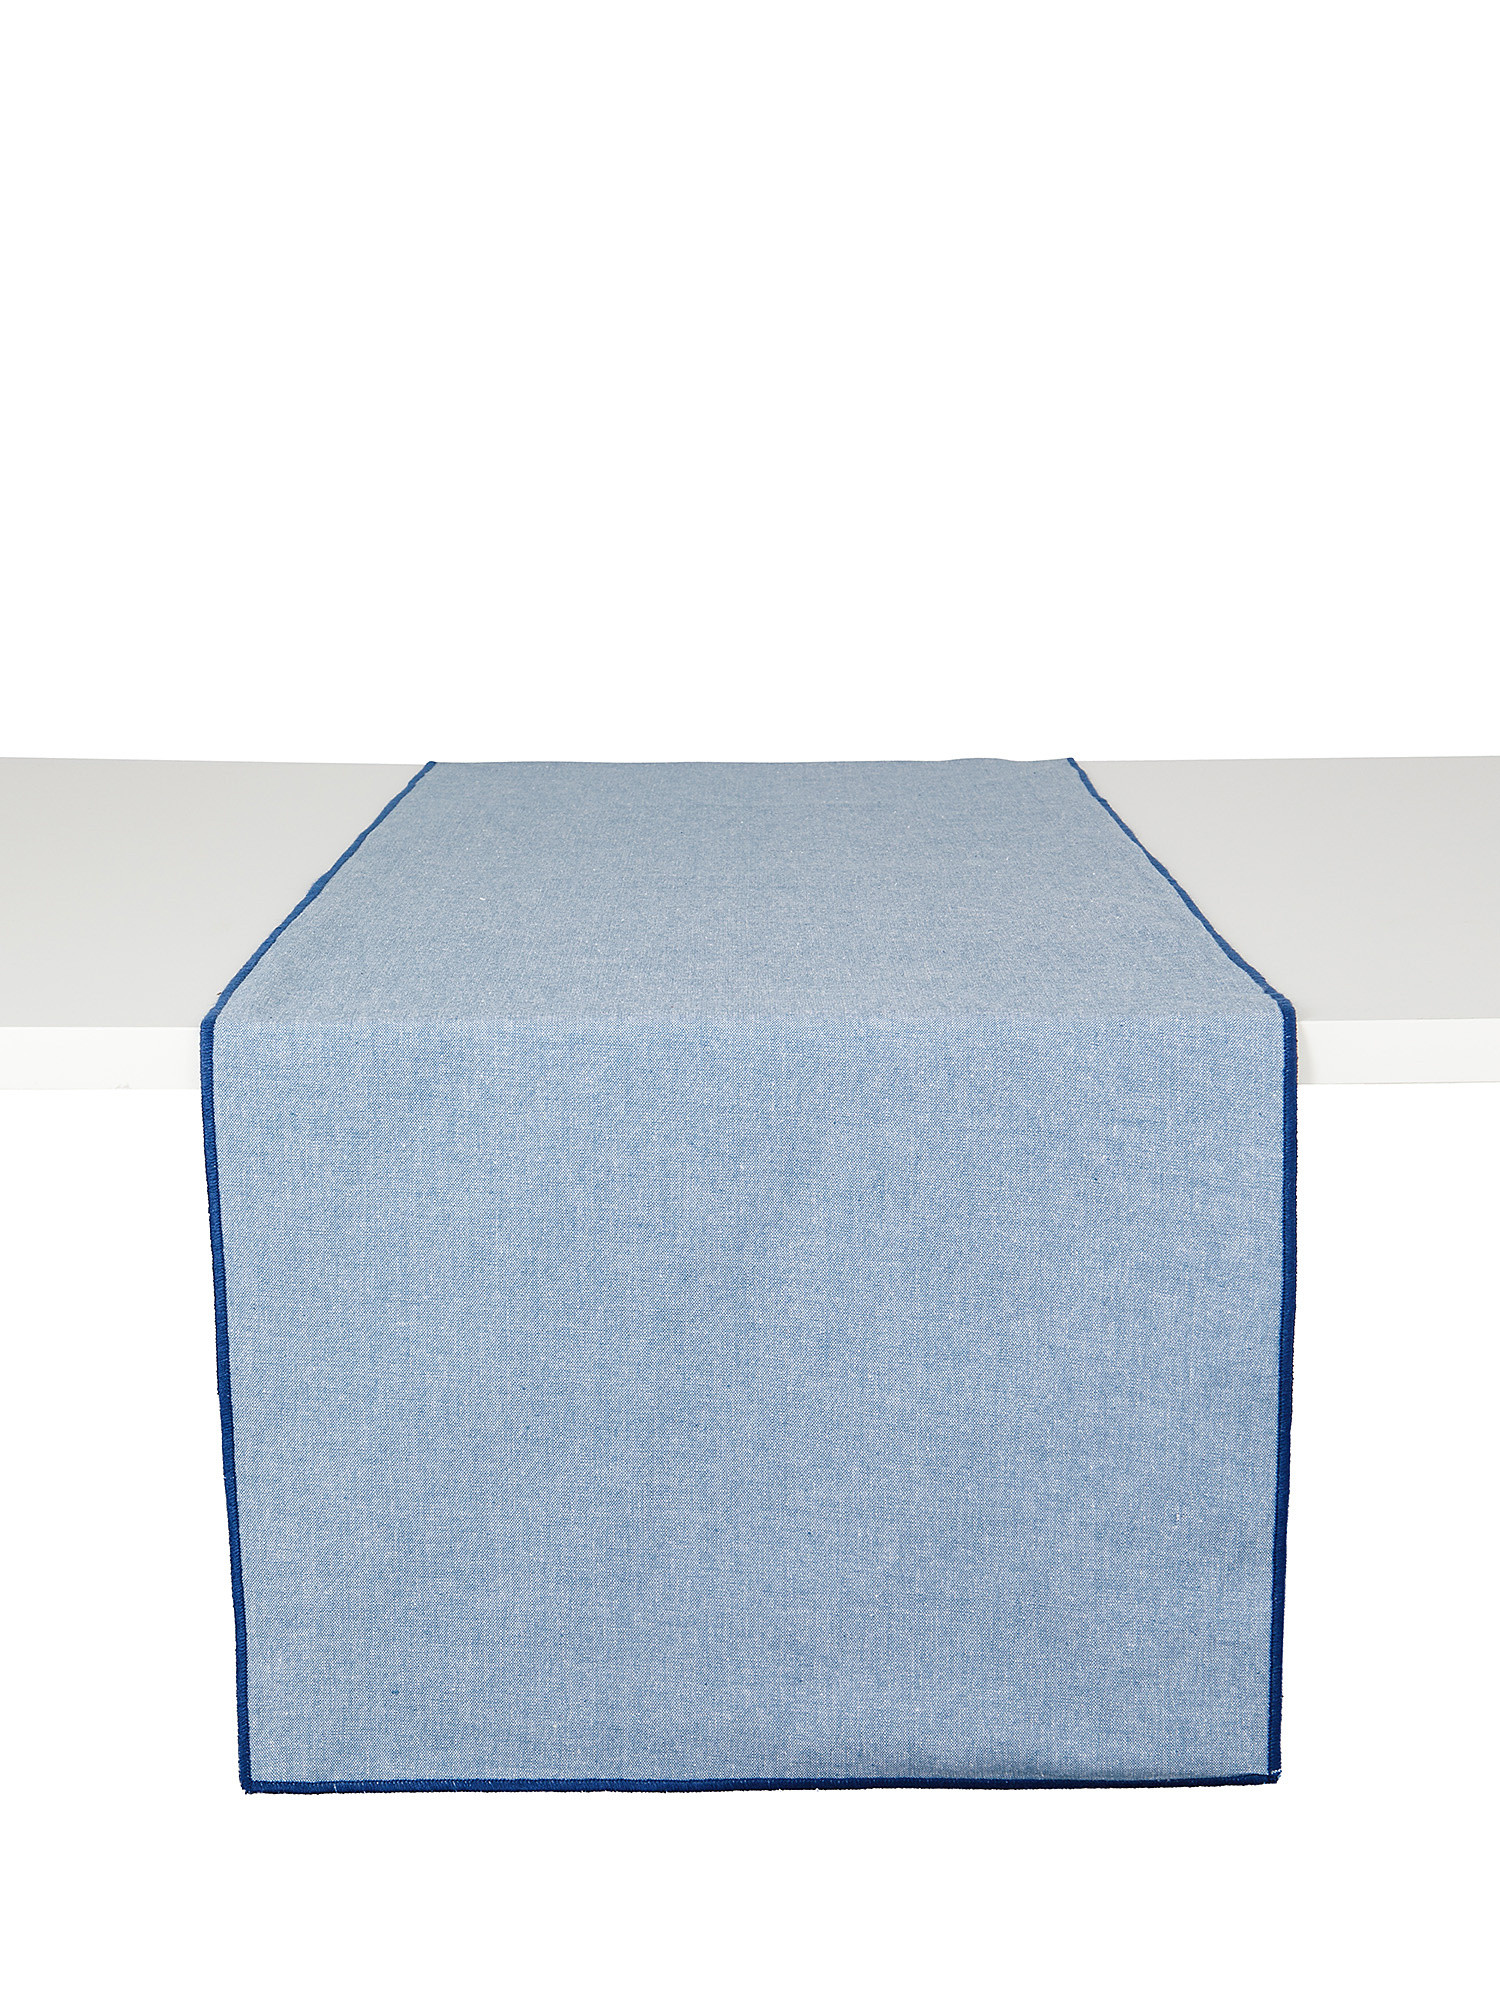 Chambre cotton table runner with contrasting hem, Blue, large image number 0